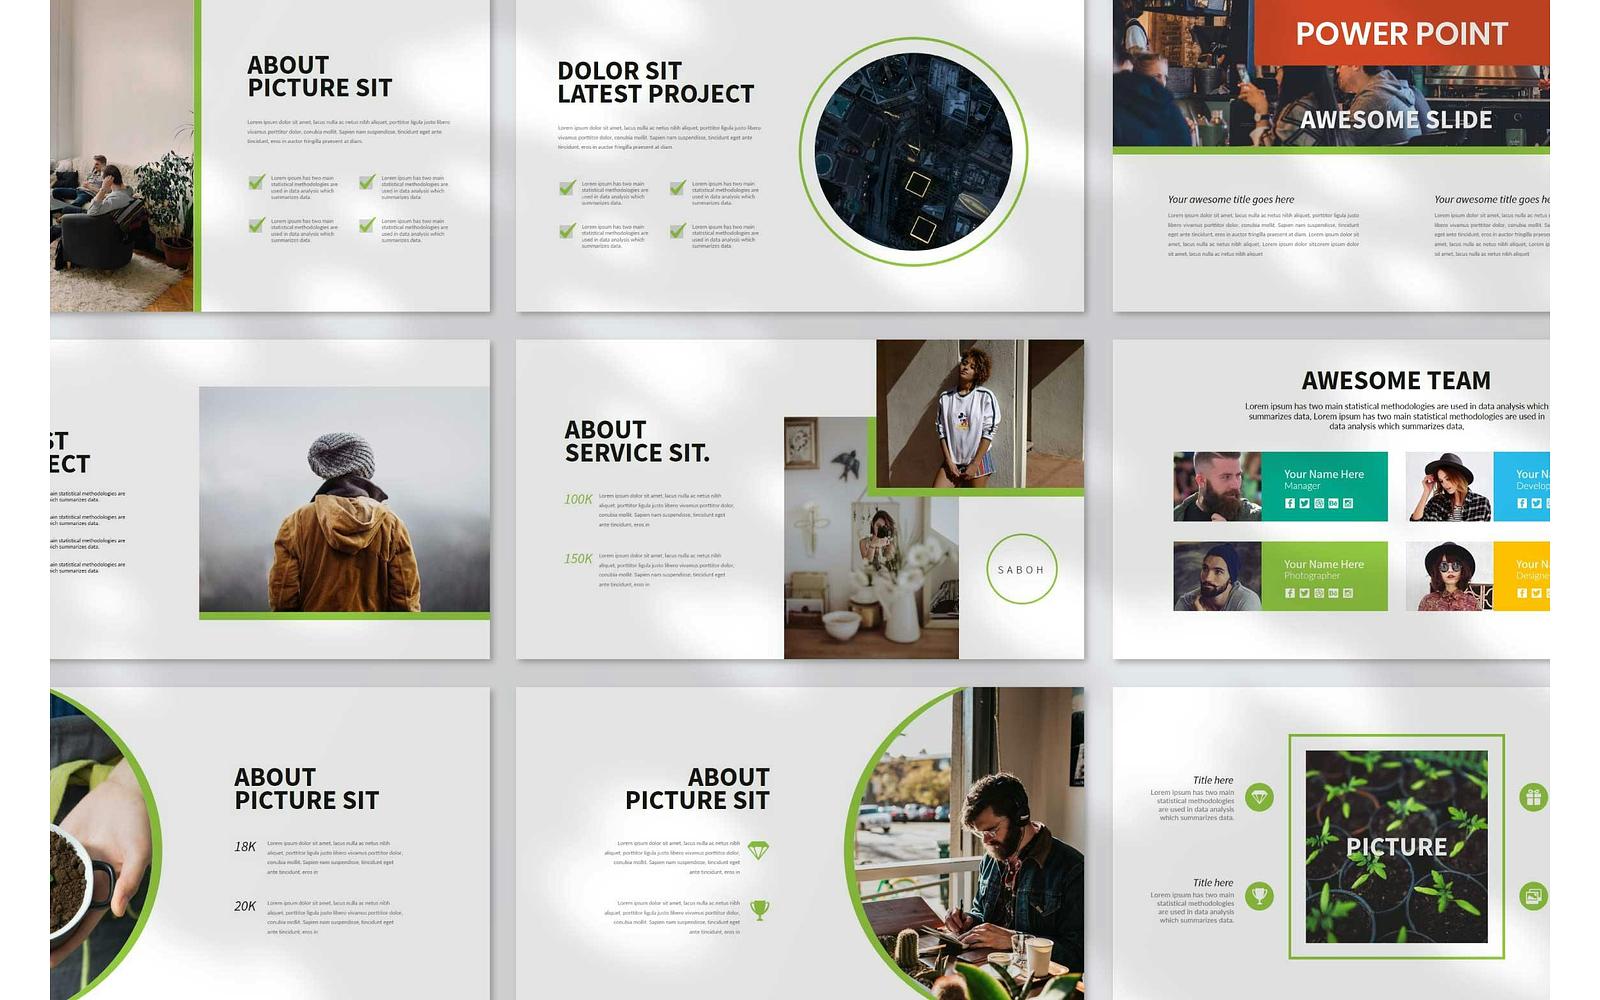 The One - PowerPoint Presentation Templates